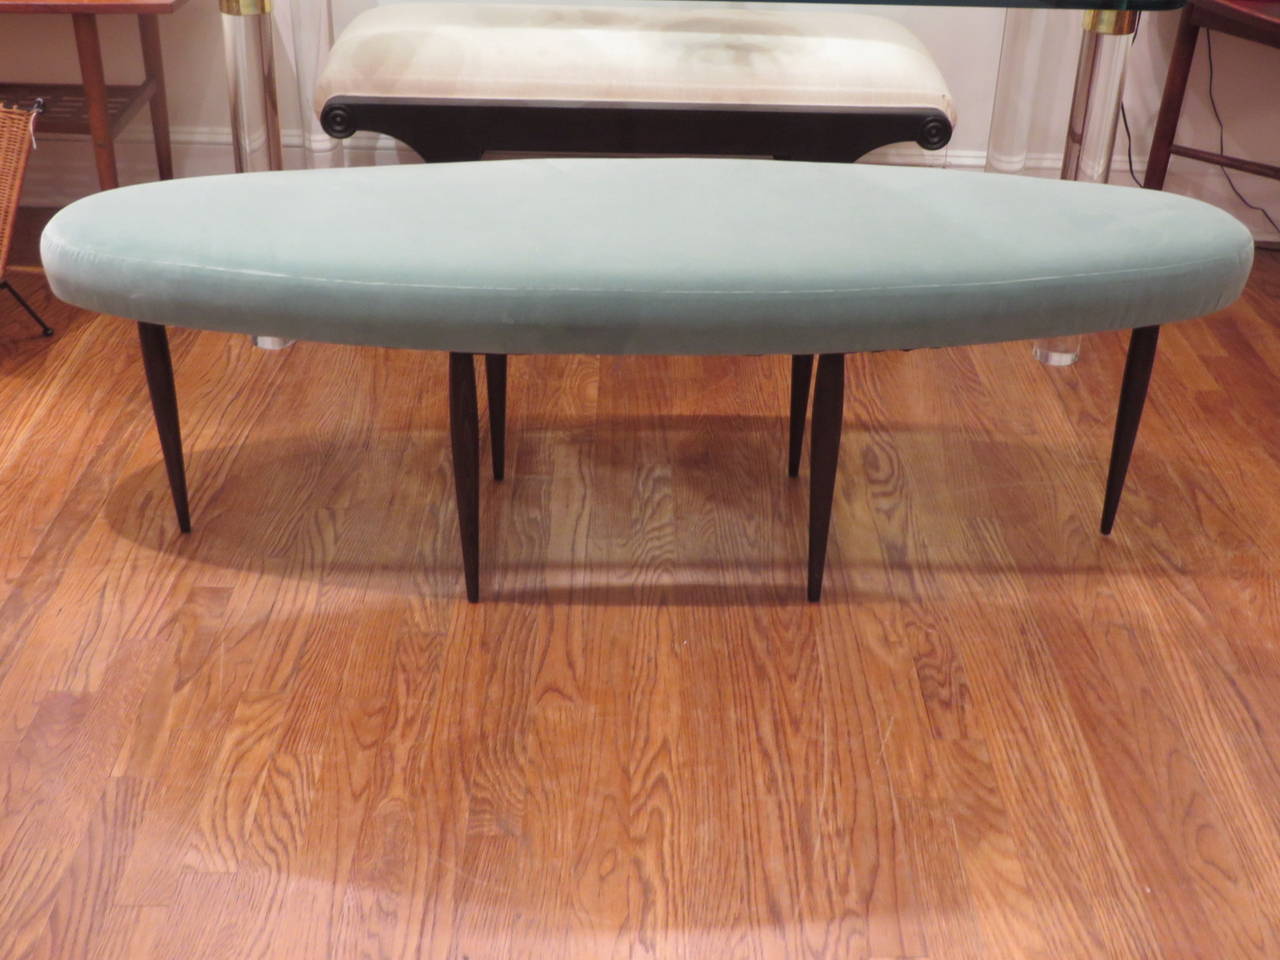 Long oval shaped bench, recently reupholstered in turquoise velvet; very delicate